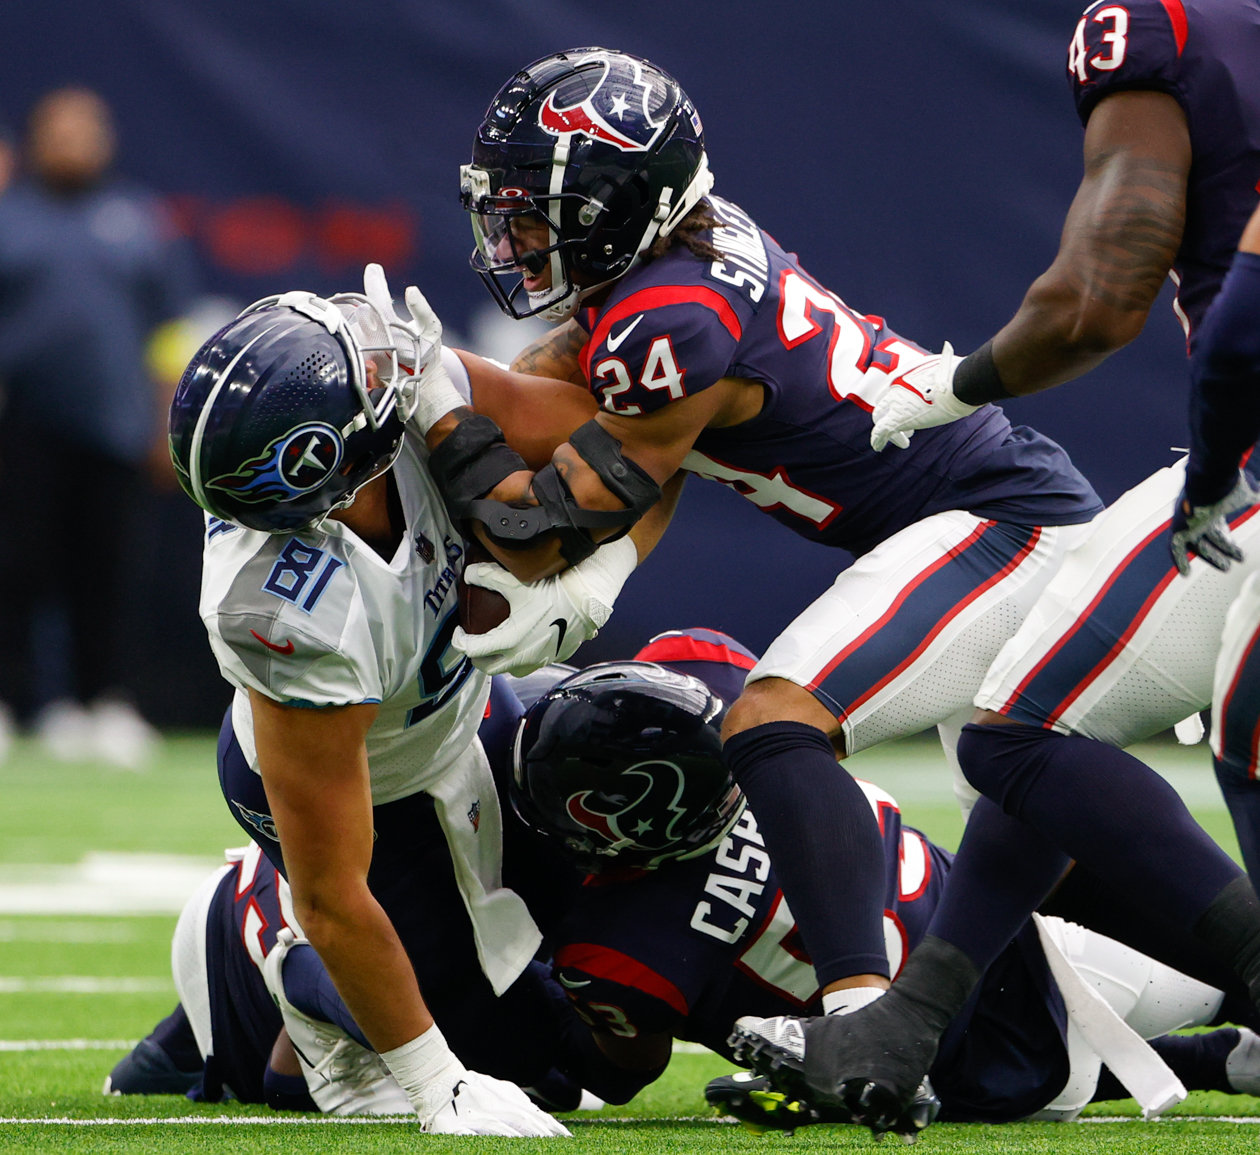 Texans cornerback Derek Stingley Jr. (24) tackles Titans wide receiver Cody Hollister (8) and is not flagged for a facemask on the play during an NFL game between the Texans and the Titans on Oct. 30, 2022 in Houston.